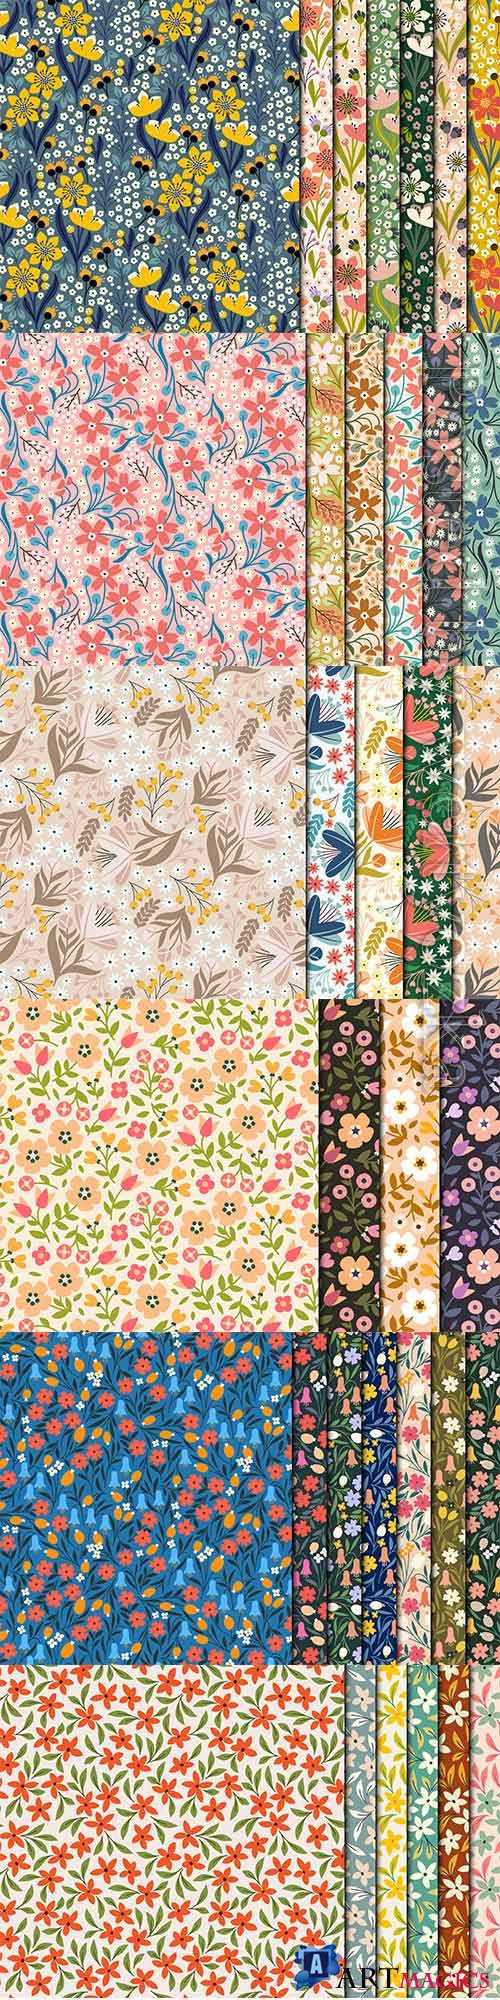 Vintage small flowers seamless pattern